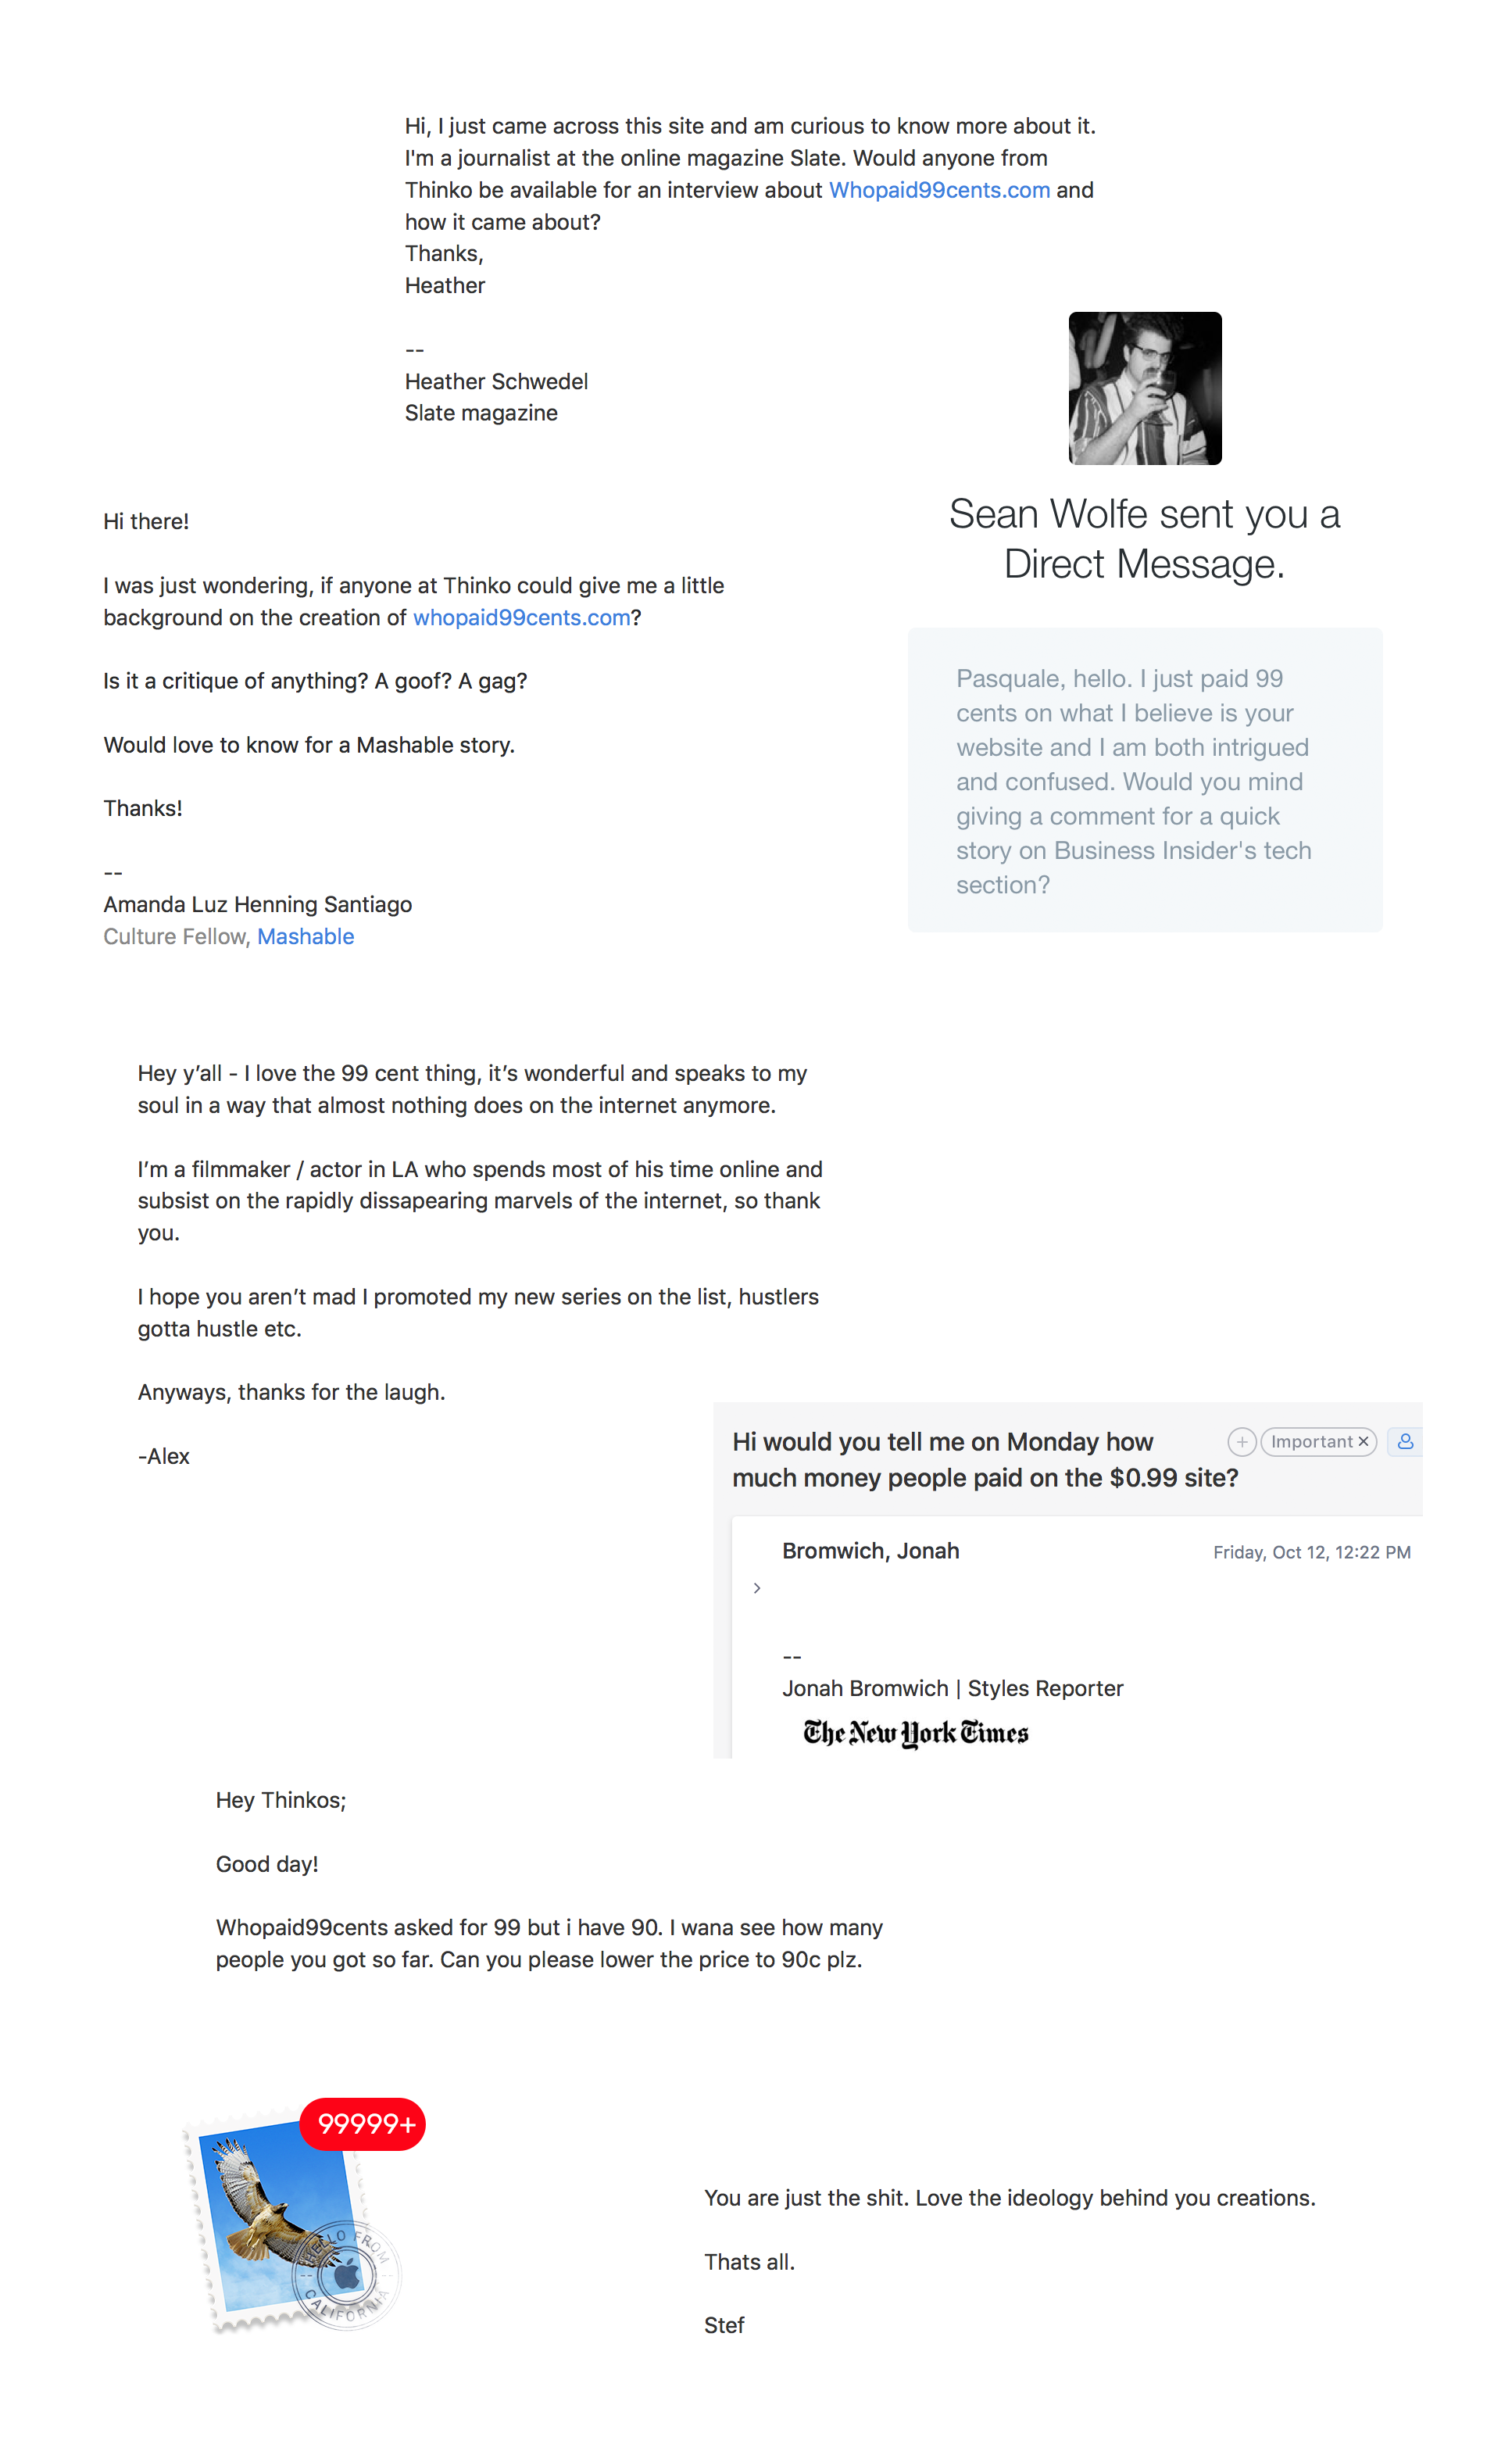 The crazy emails and DMs we got on the day of launch.